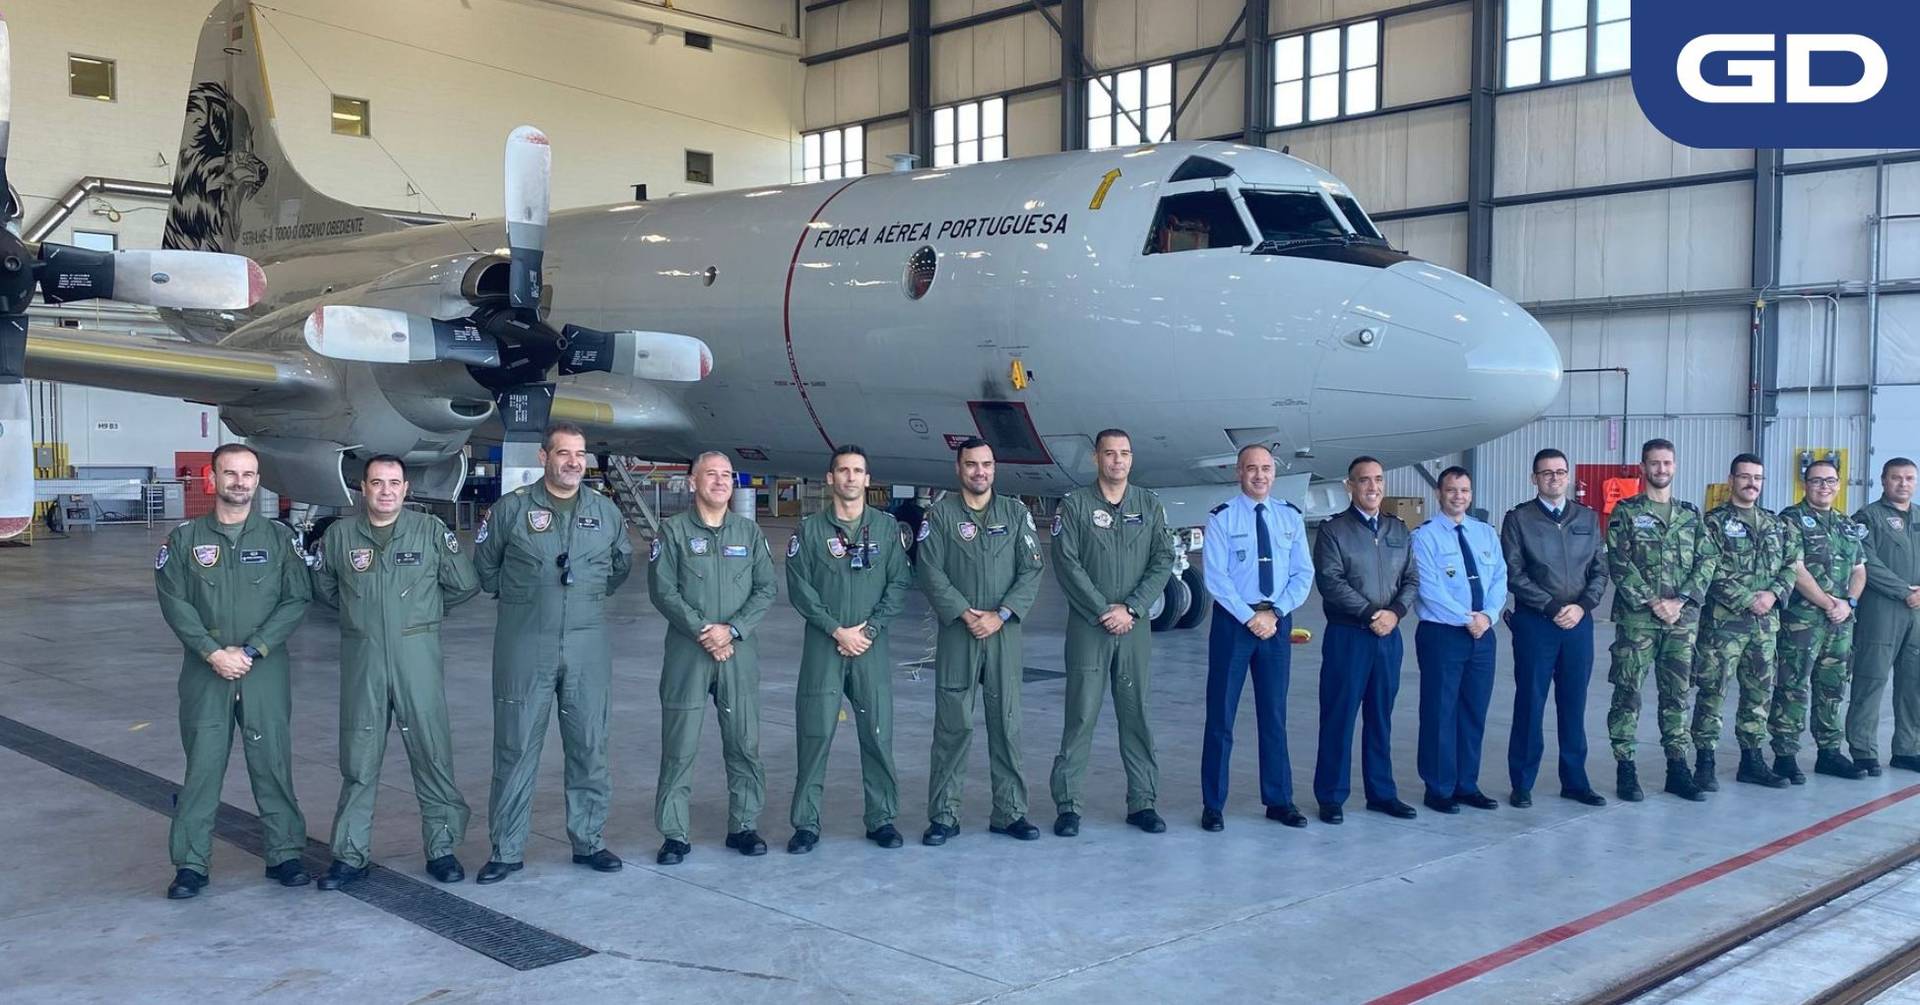 Air crew standing in front of a Portuguese P-3C aircraft.